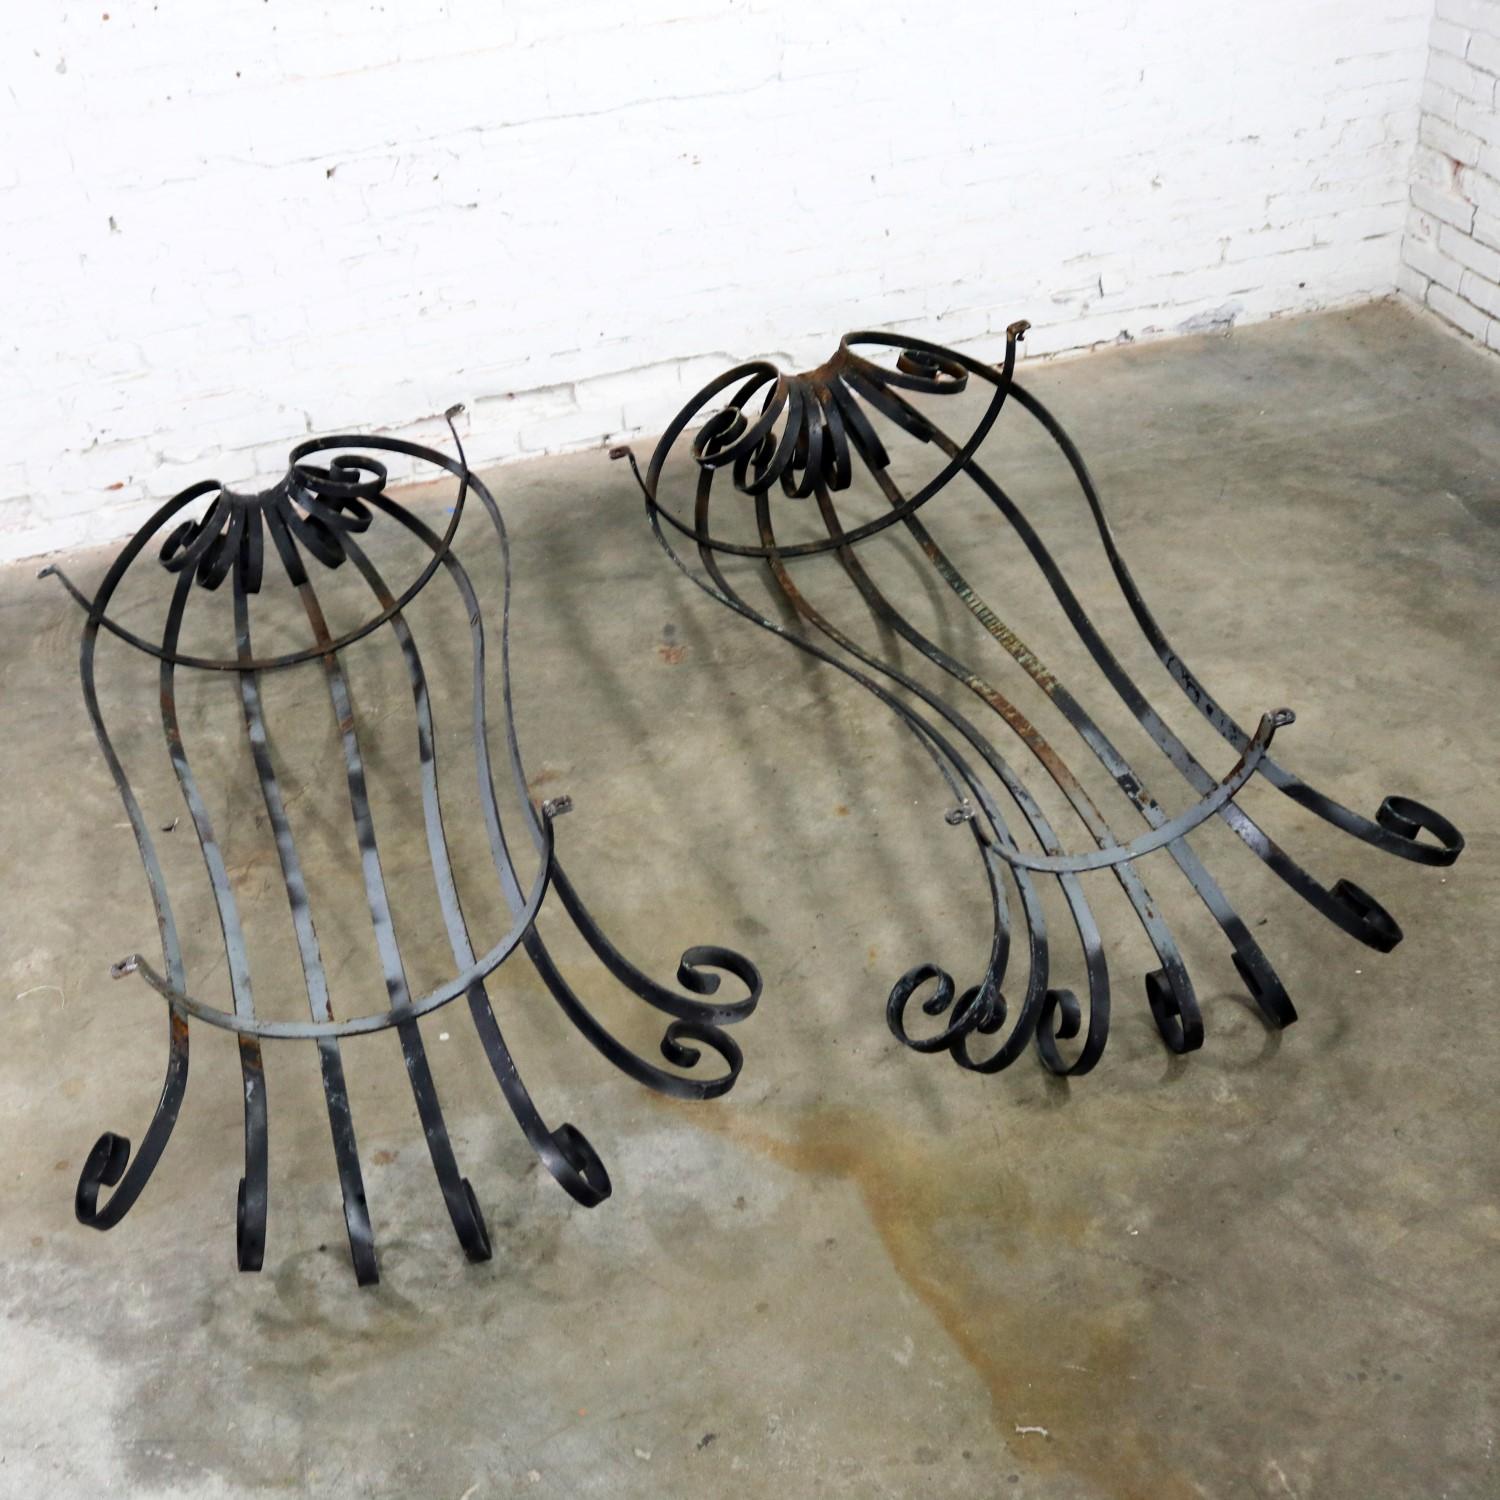 Architectural Antique Window Guards or Wall Urn Planters Hand-Wrought Iron 6